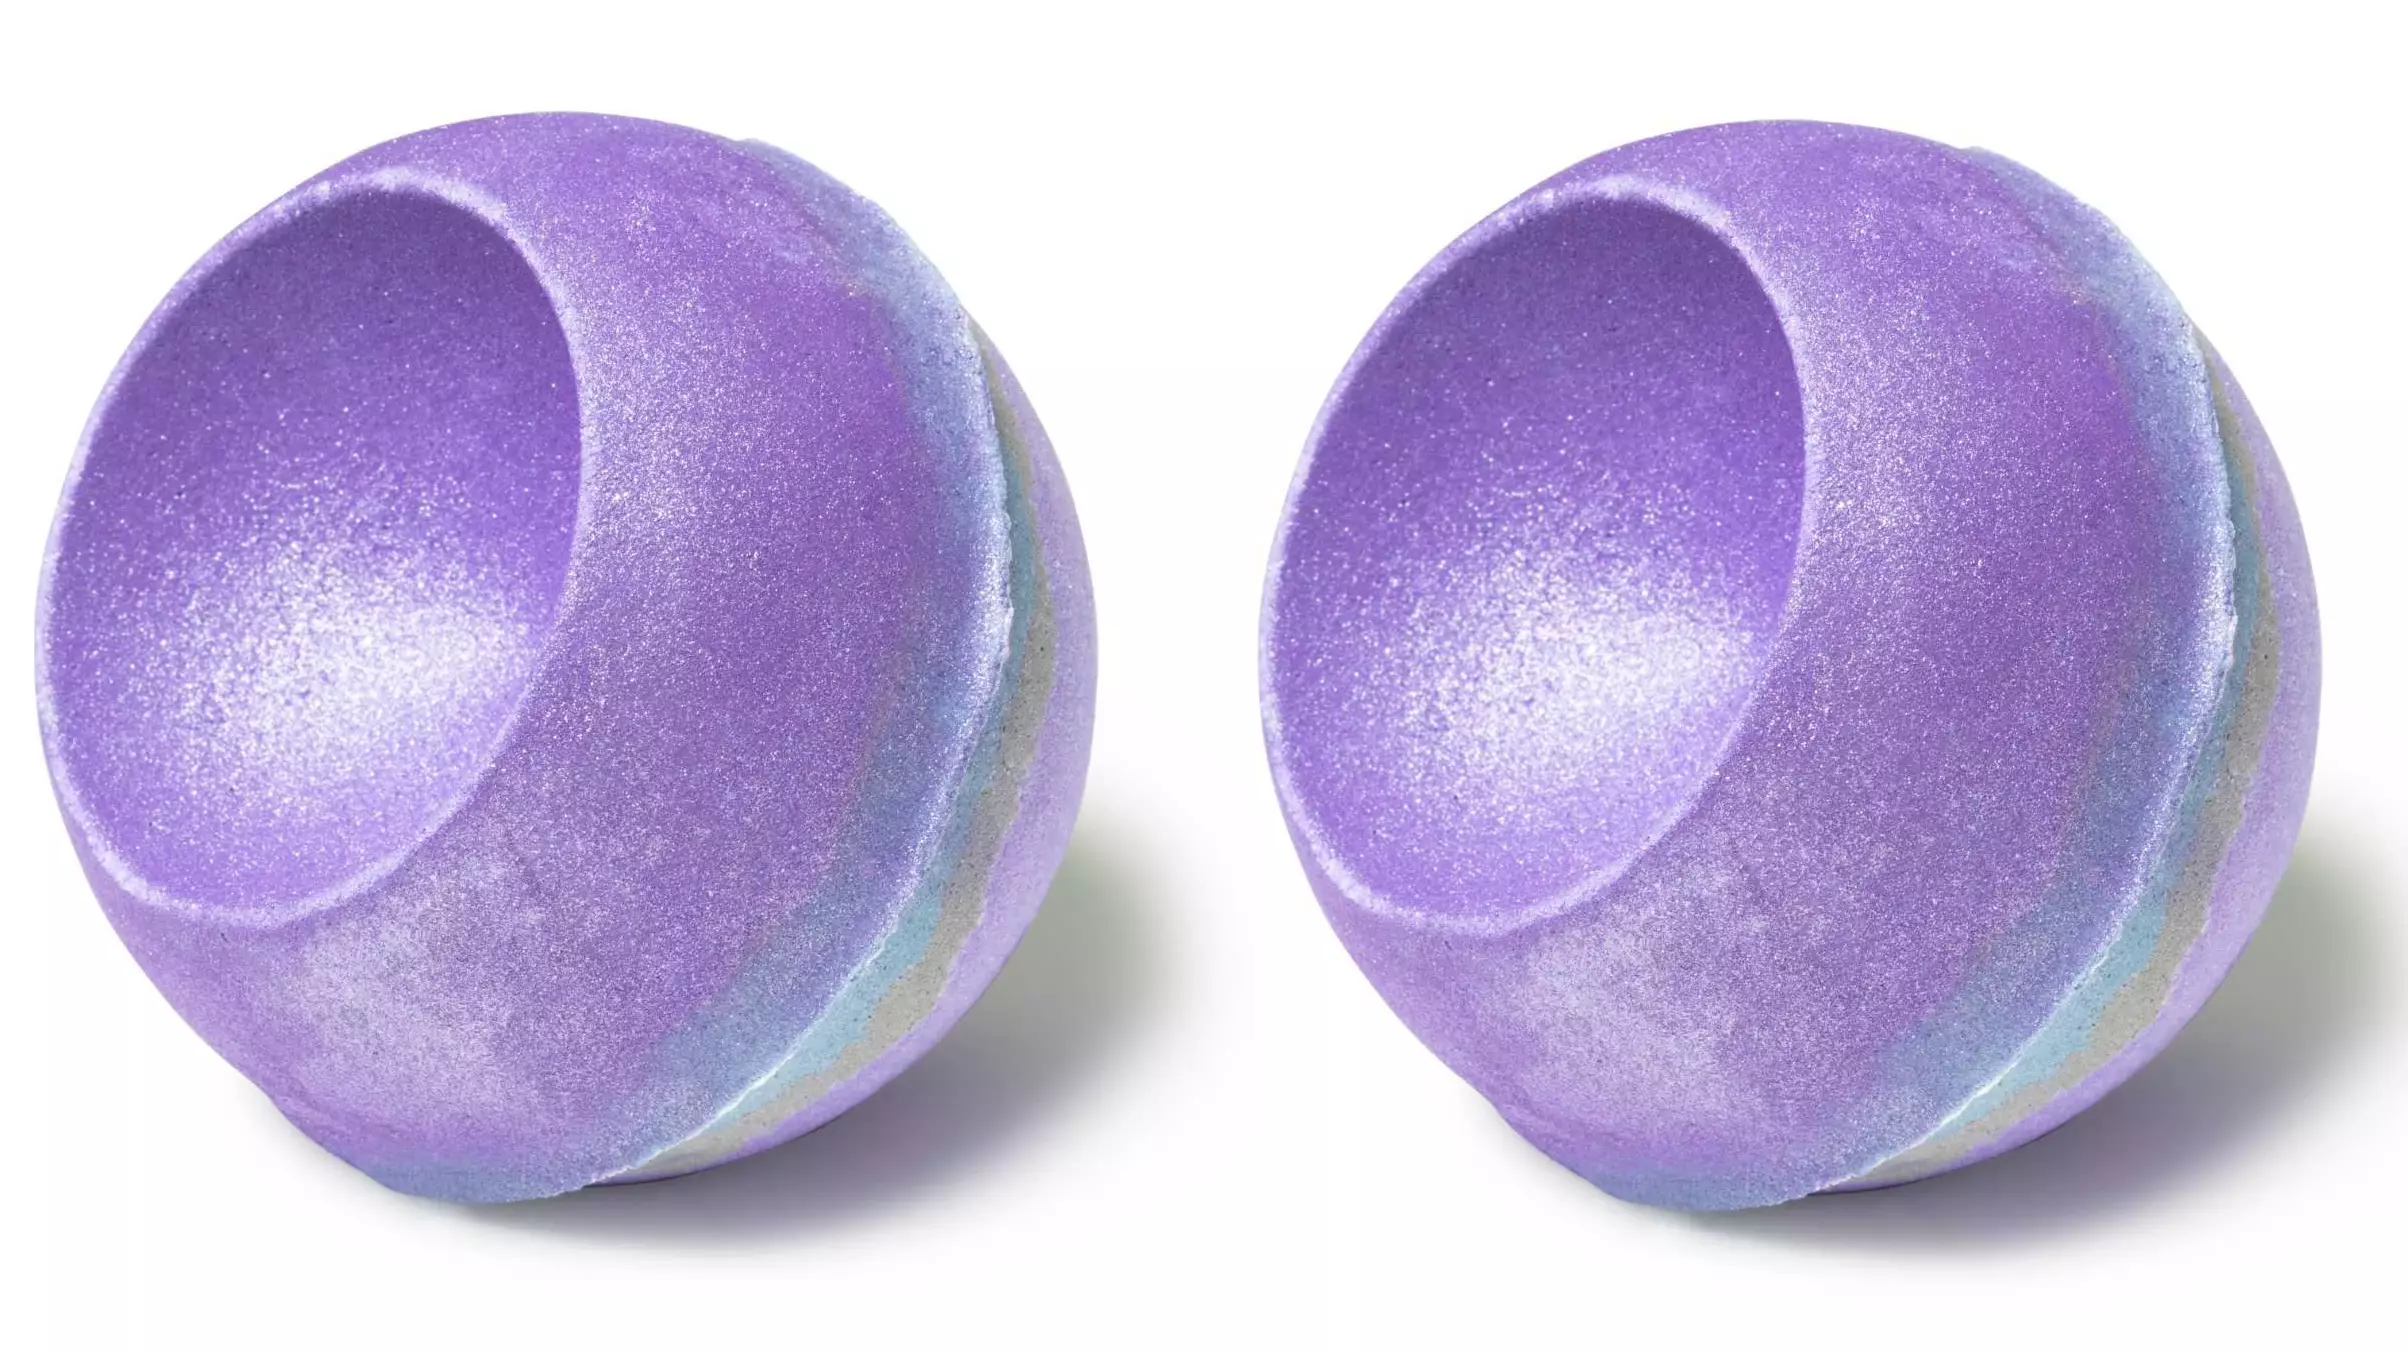 Lush Is Selling Holographic Bath Bombs Inspired By Ariana Grande